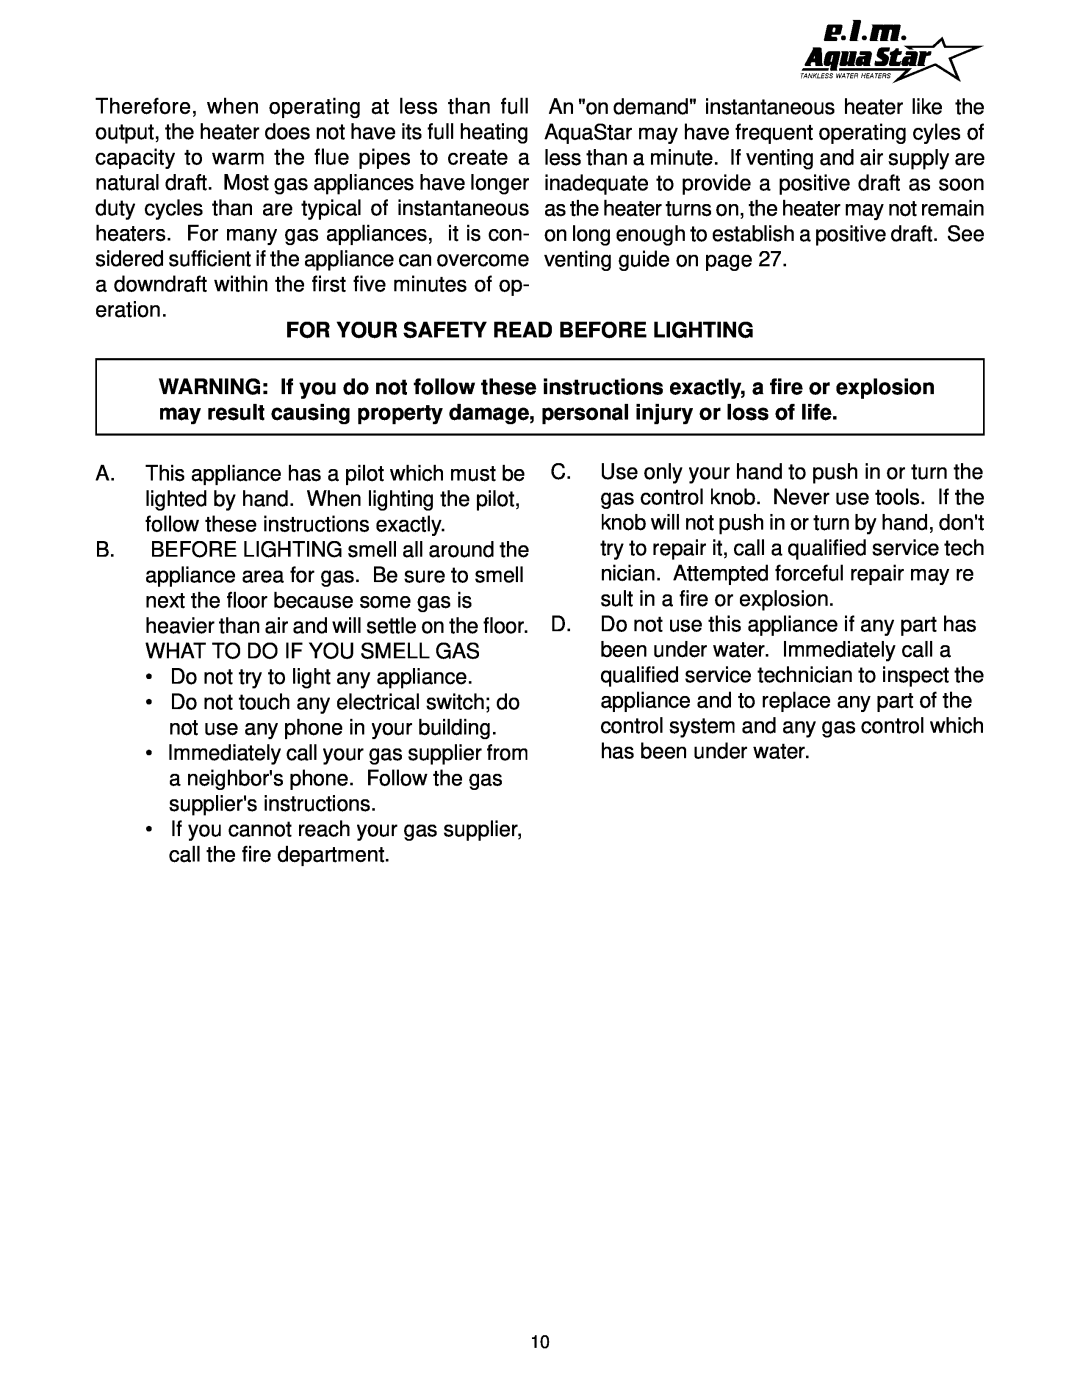 AquaStar 170 VP manual For Your Safety Read Before Lighting 